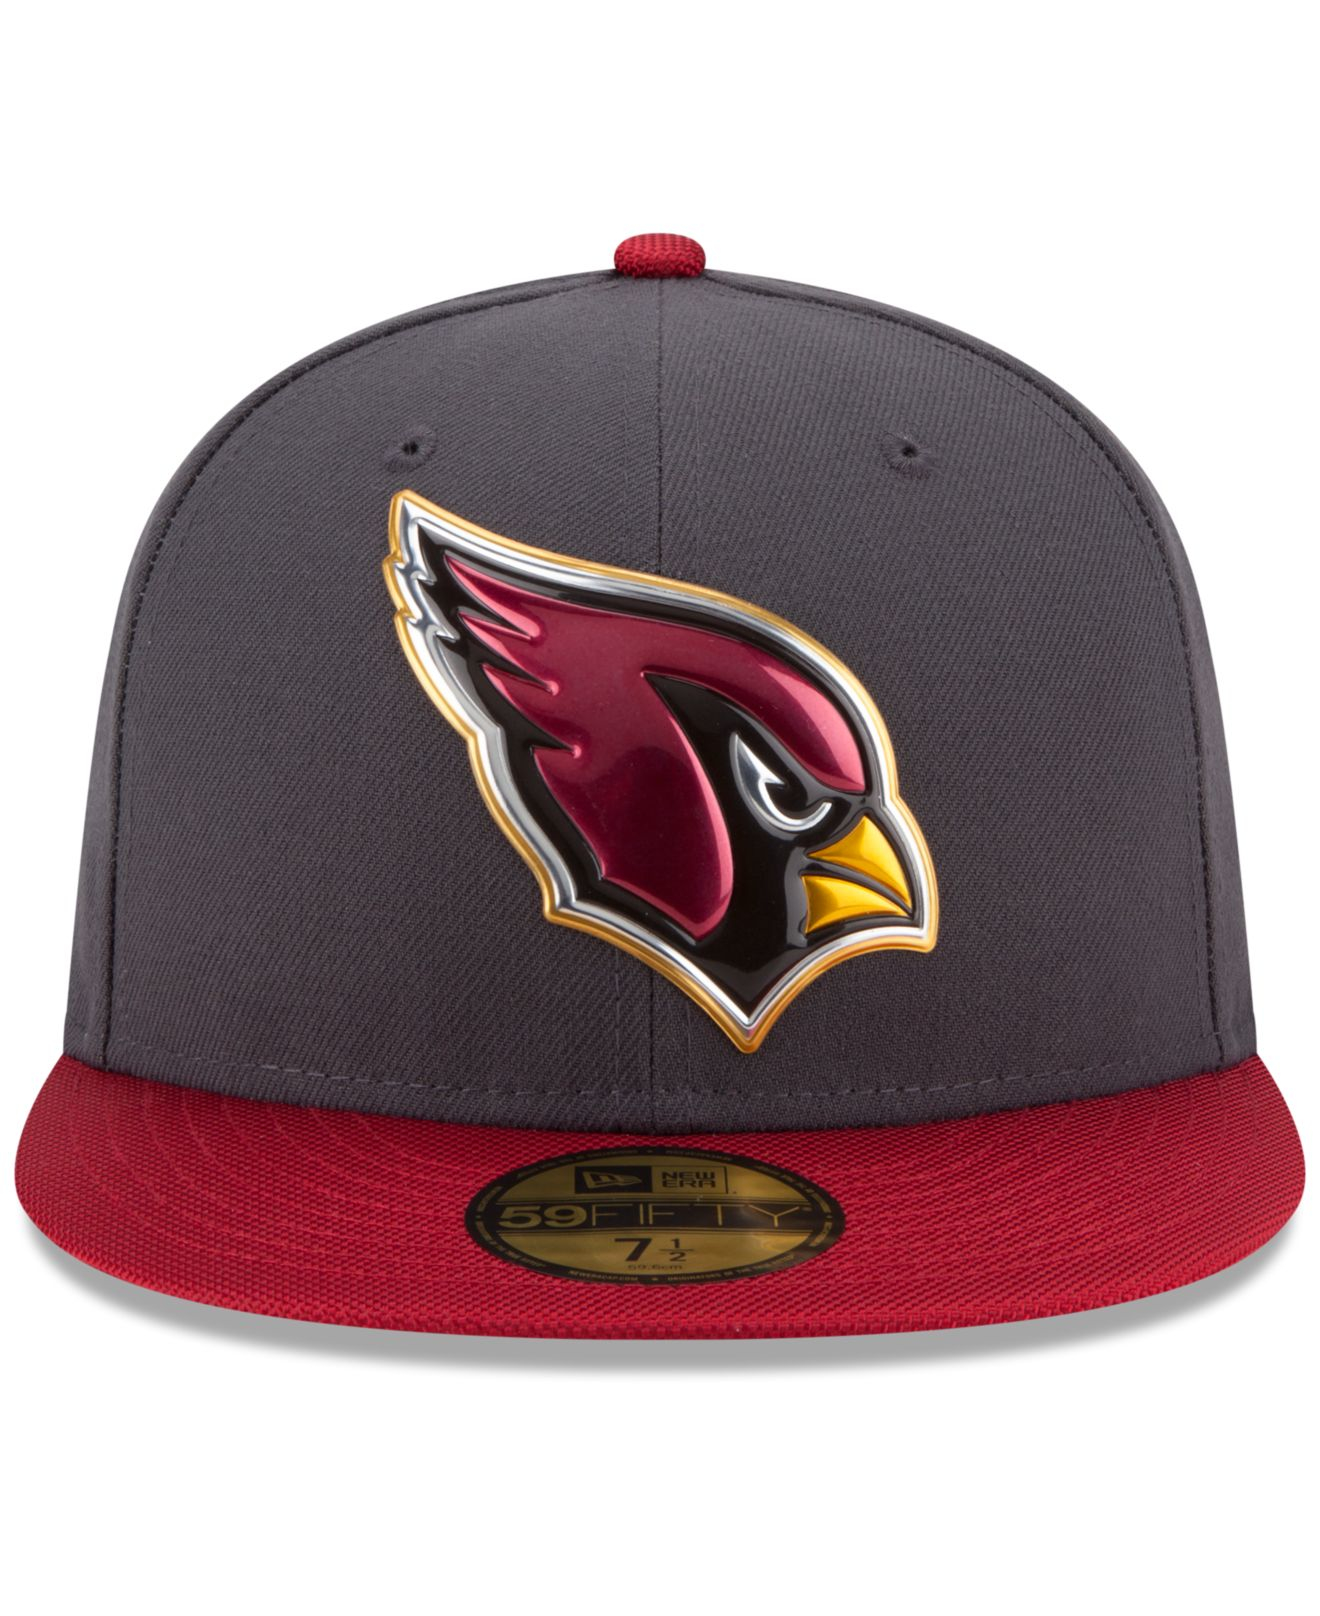 Lyst - Ktz Arizona Cardinals Gold Collection On-field 59fifty Cap in ...